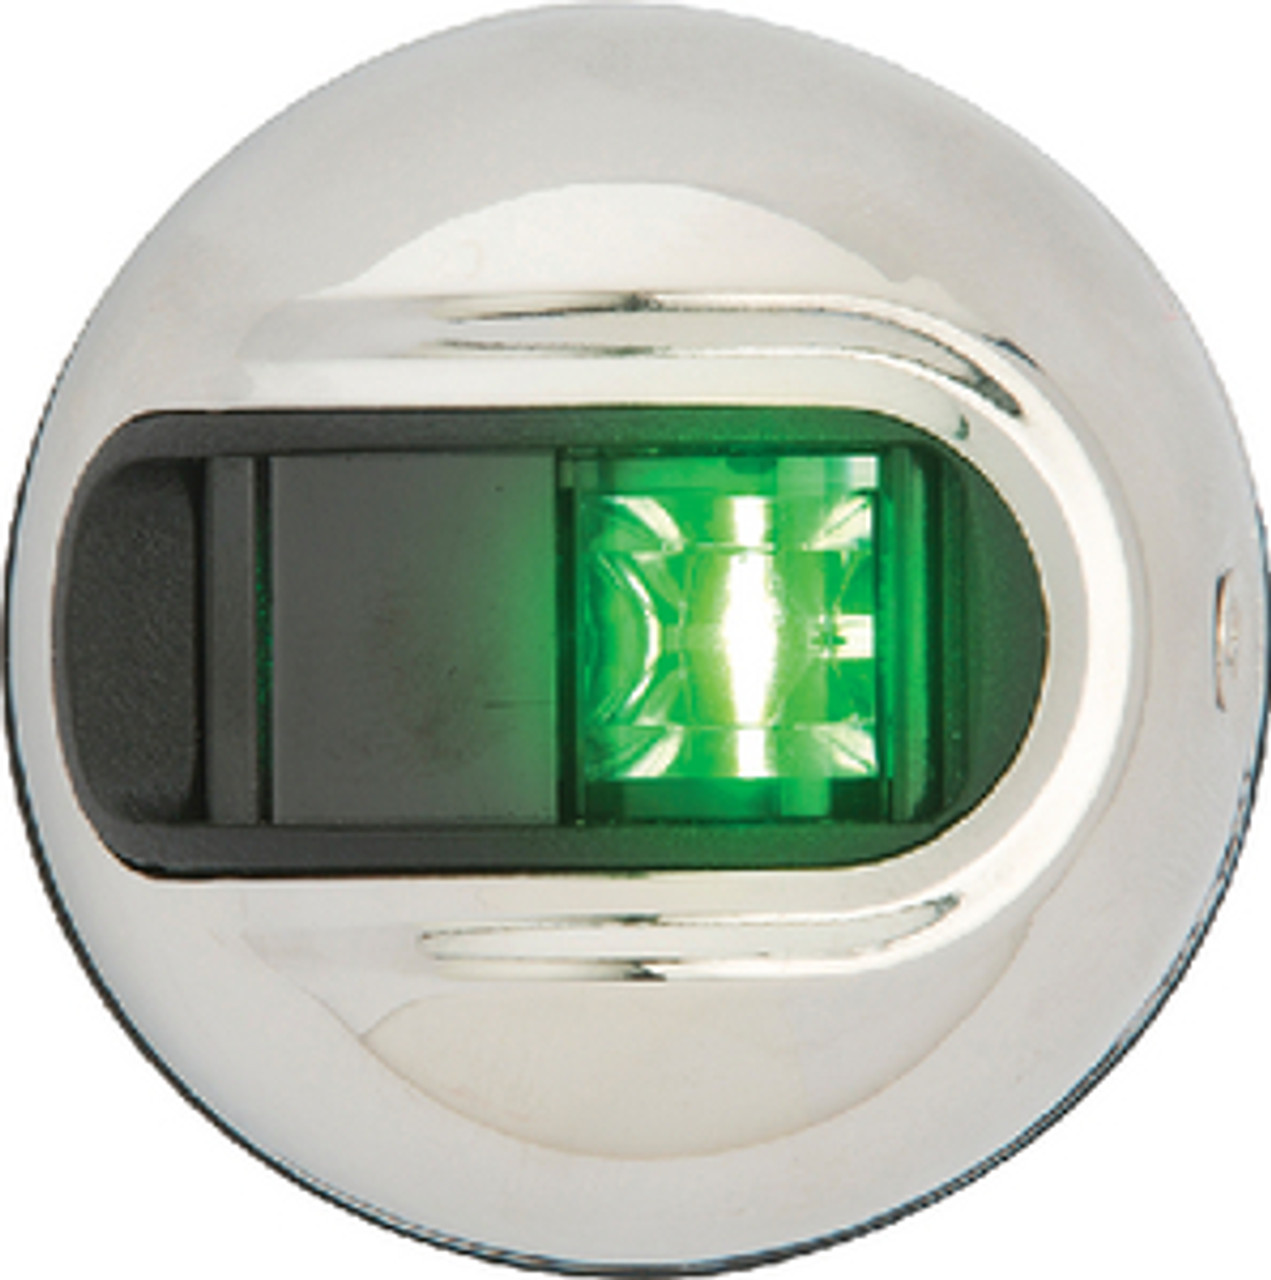 attwoodÂ® - LIGHTARMORâ„¢ LED VERTICAL SURFACE MOUNT SIDE LIGHT - Description: Round Type: Starboard Lens: Green Housing: Stainless Visibility: 2 nm